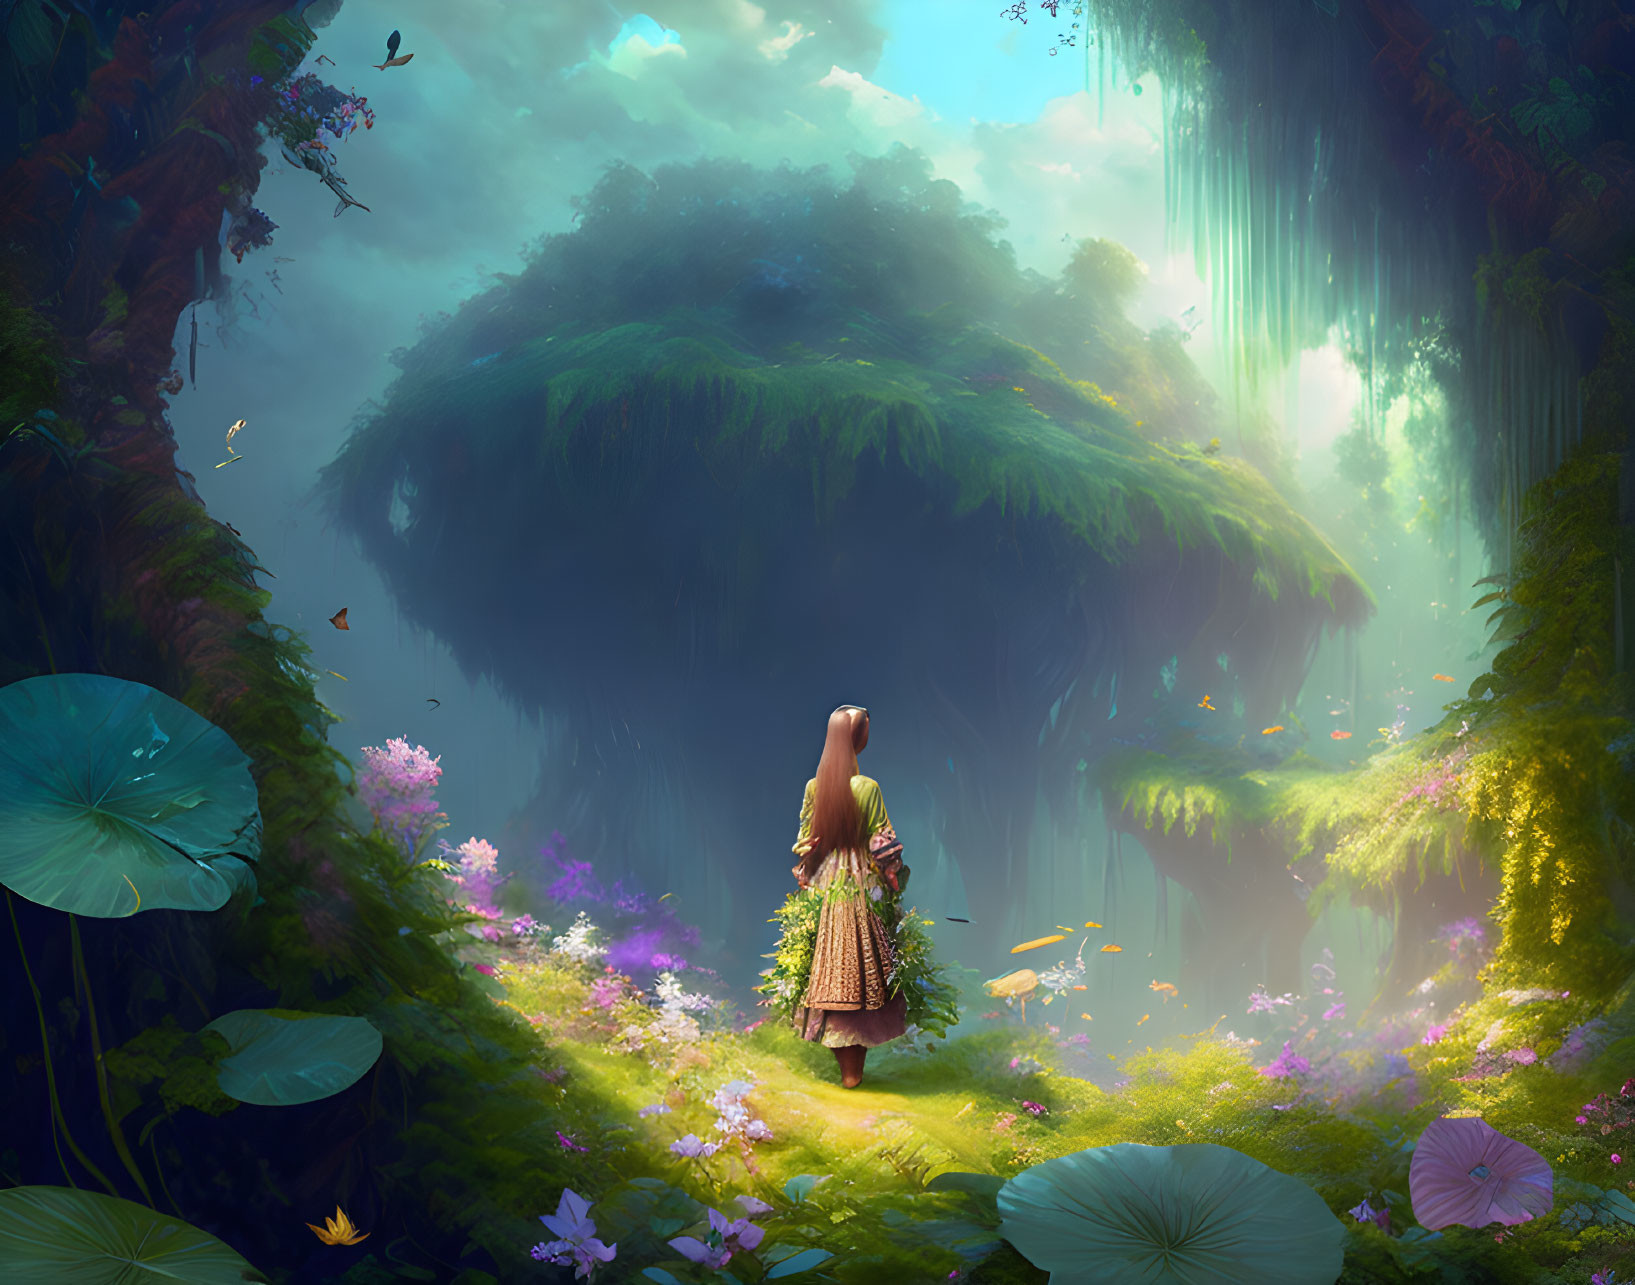 Woman in dress gazes at floating island in mystical forest clearing